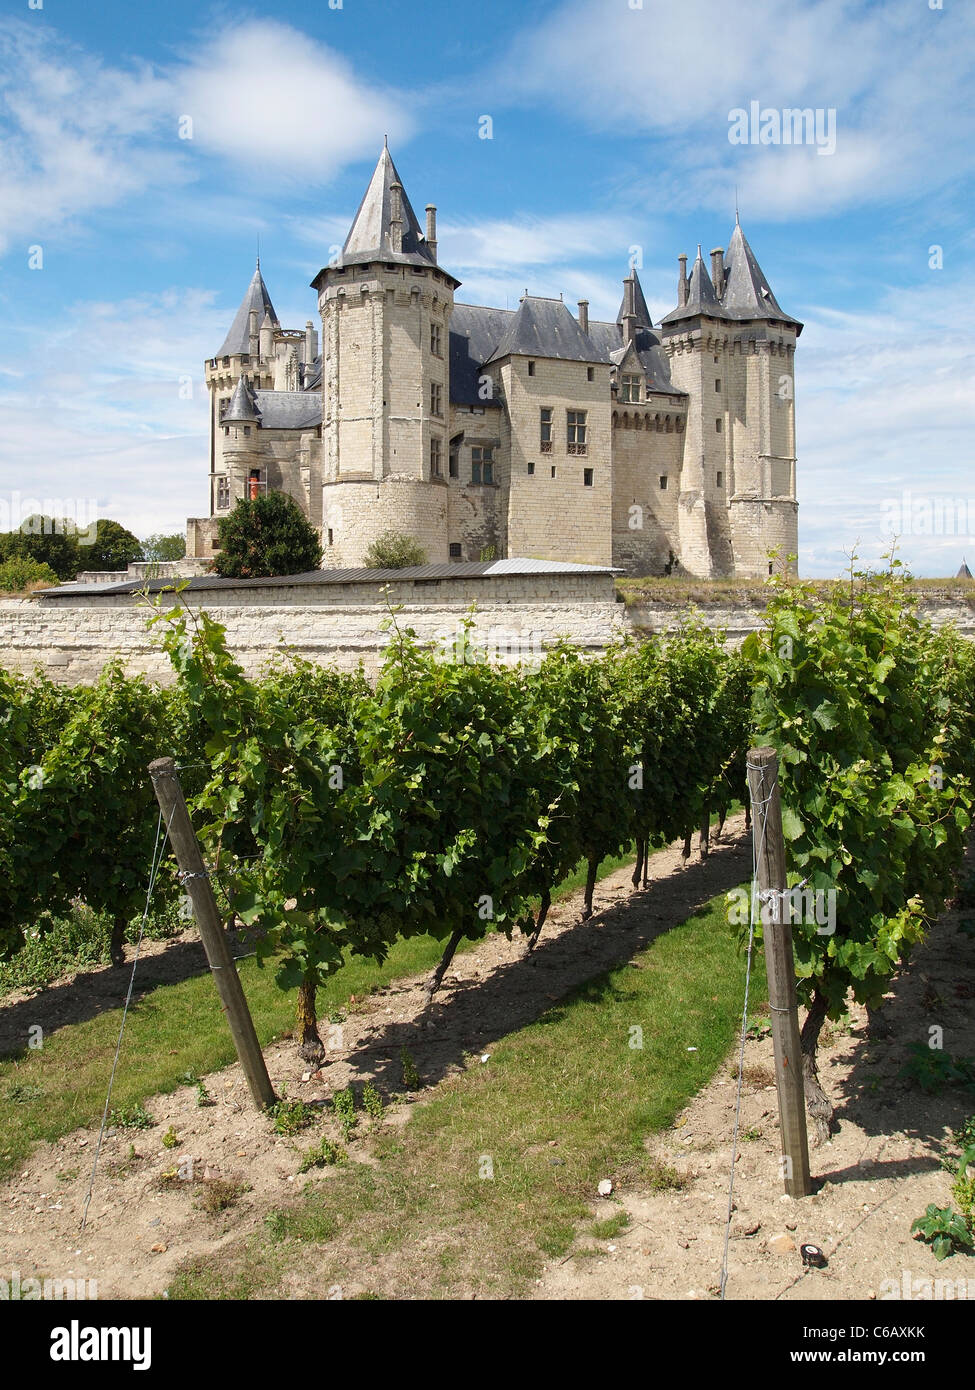 Chateau de Saumur with vineyard in the foreground, Anjou, region, Loire valley, France Stock Photo